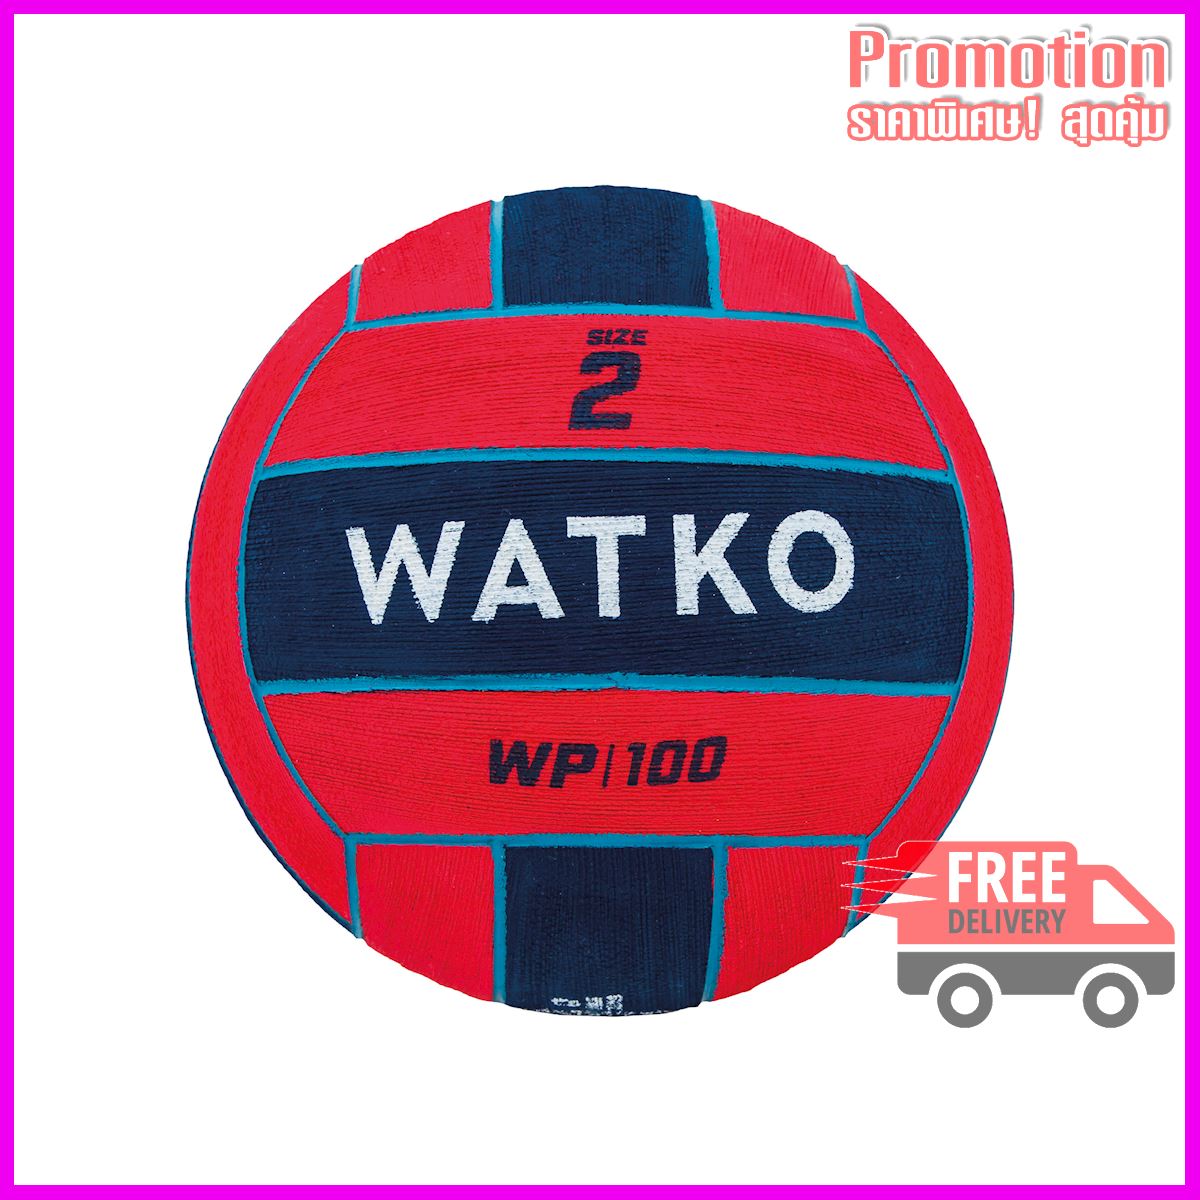 WATER POLO BALL WP500 SIZE 2 - RED / BLUE